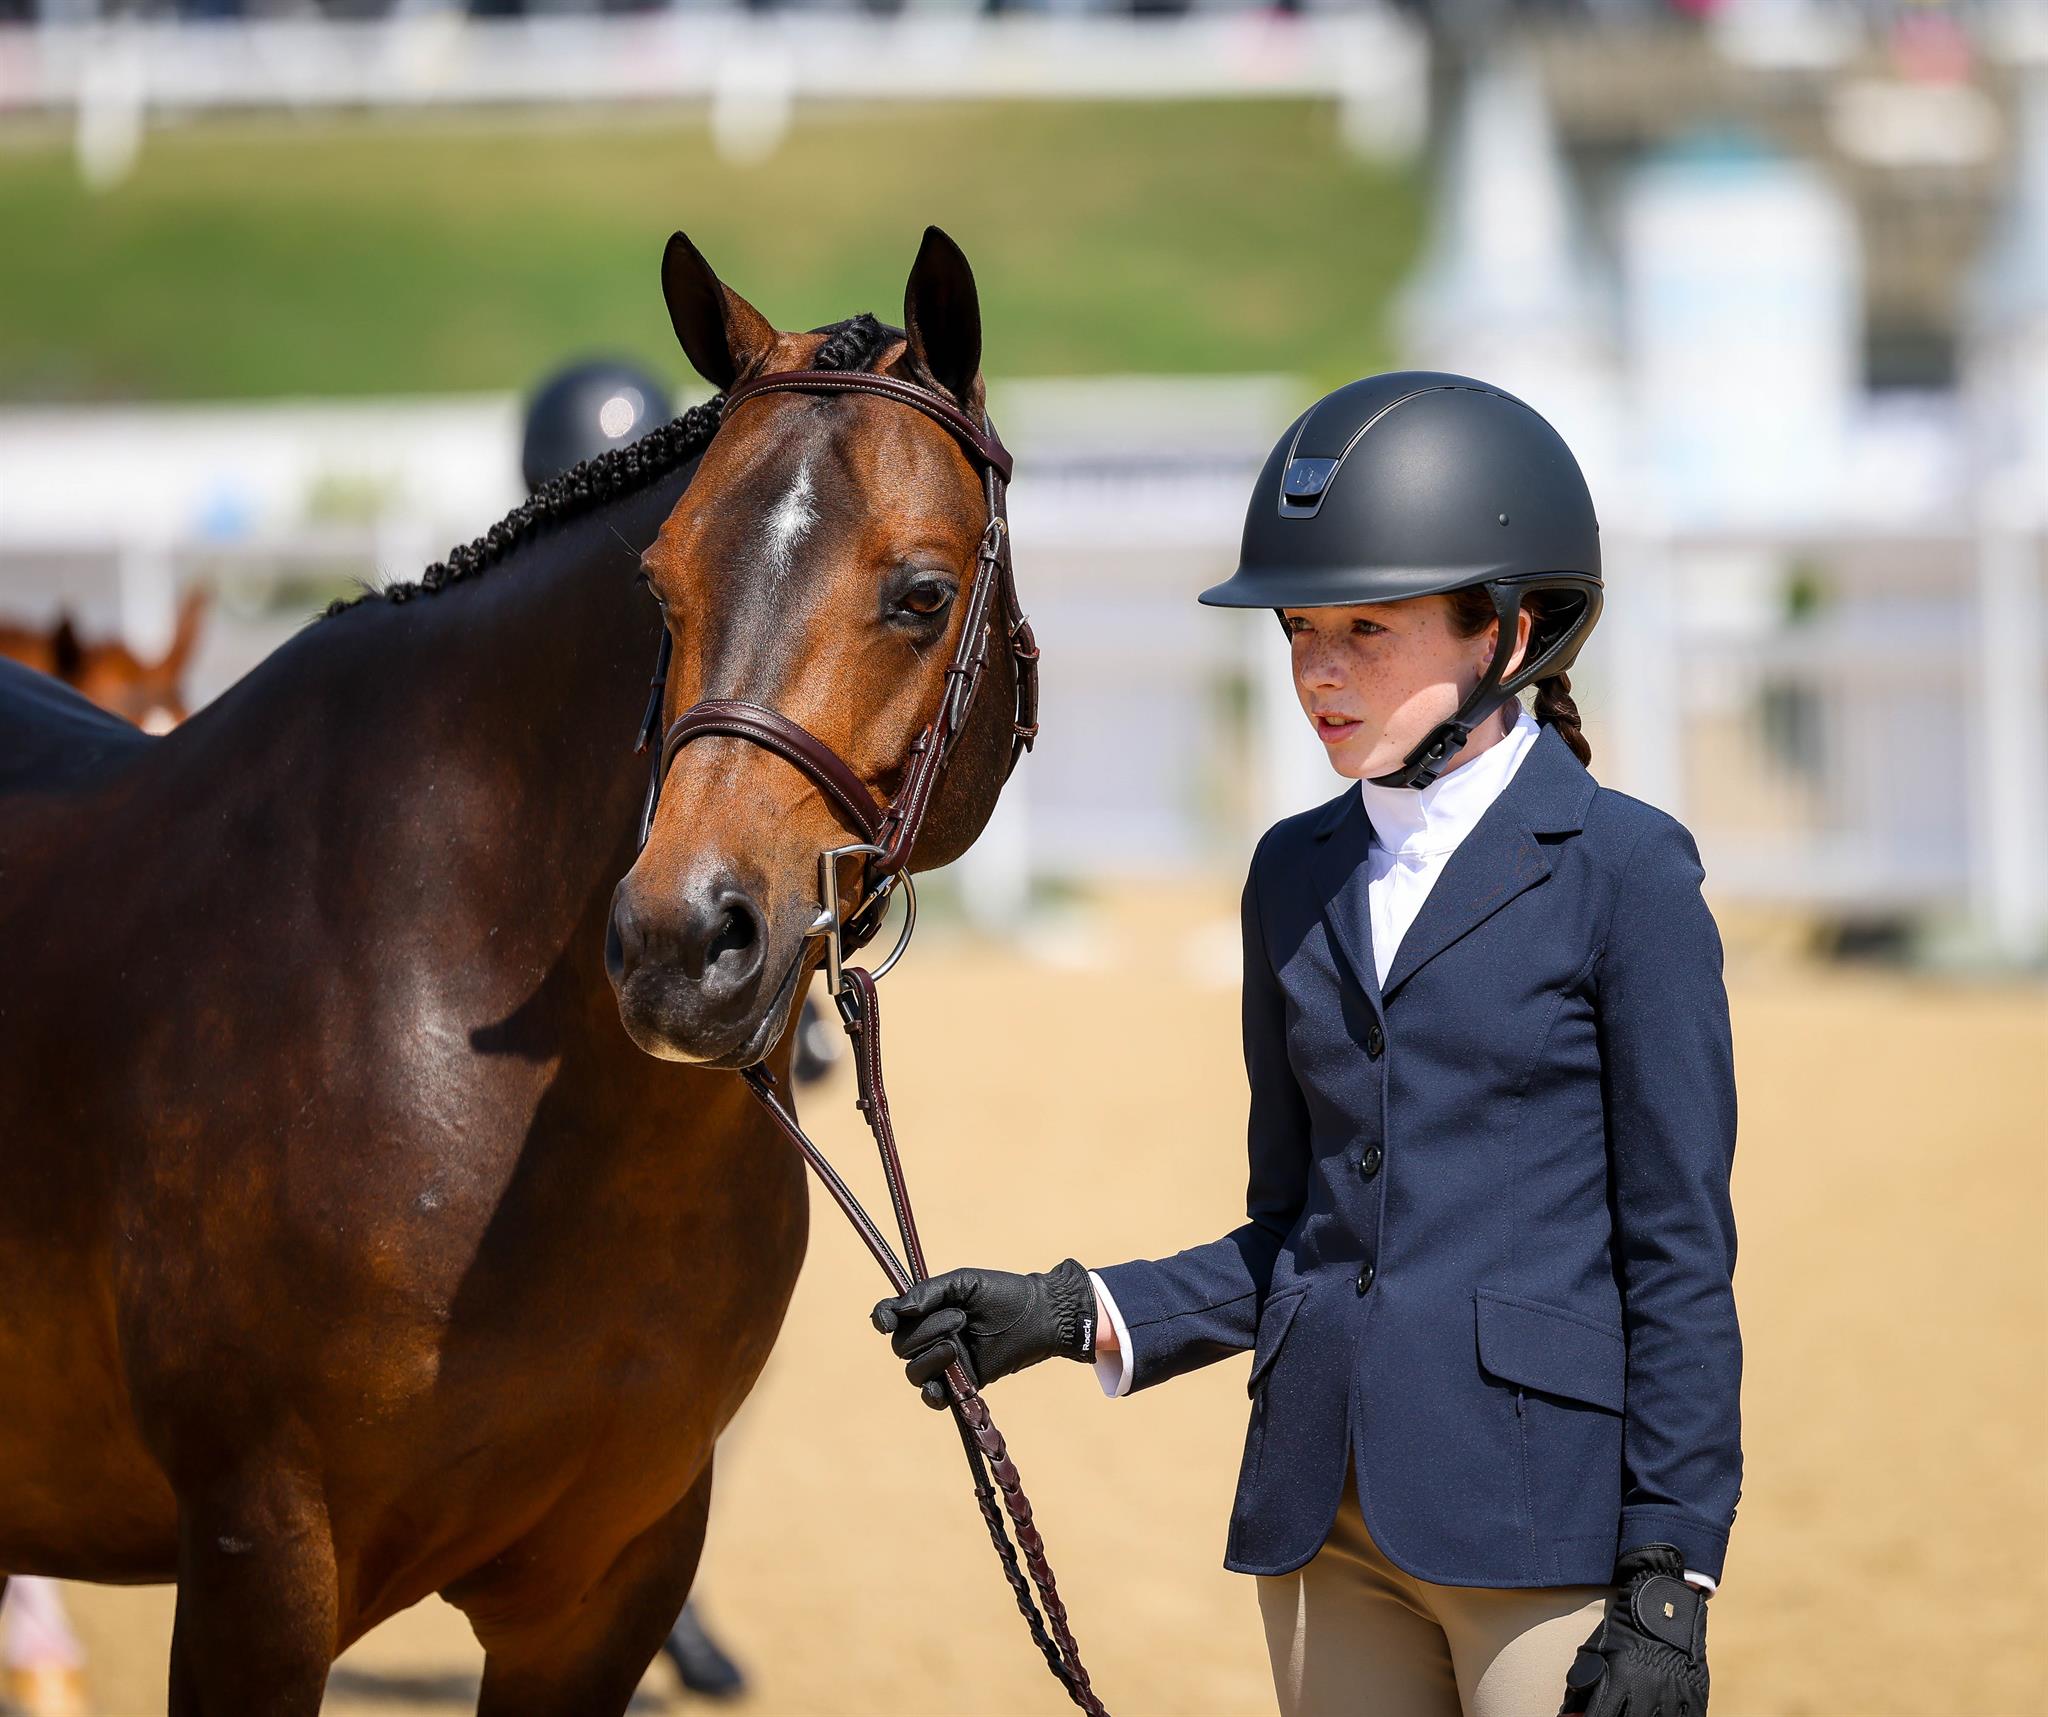 USEF Pony Finals presented by Marshall & Sterling US Equestrian